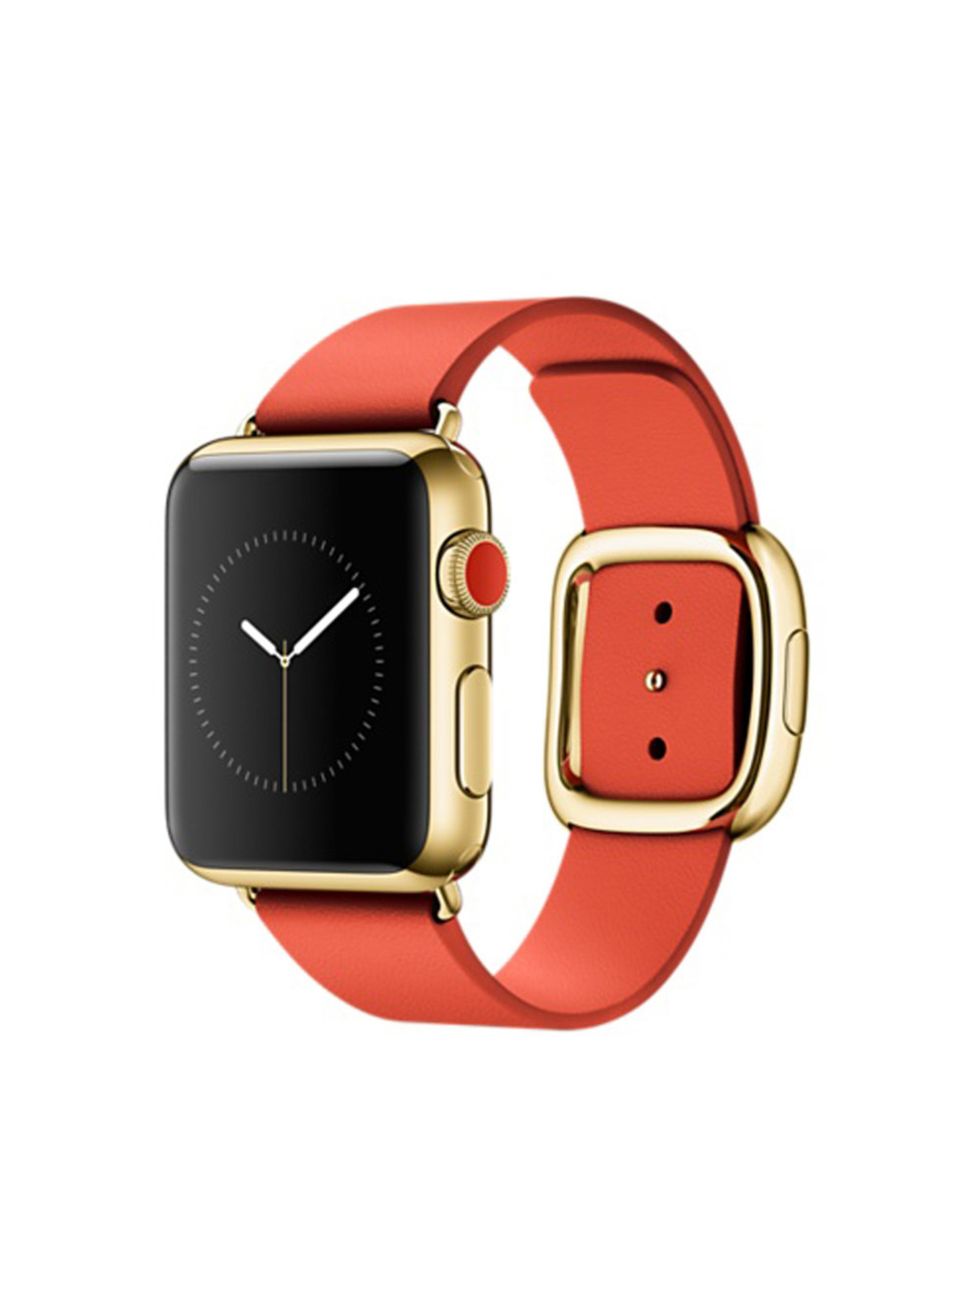 Red, Orange, Carmine, Maroon, Display device, Gadget, Rectangle, Communication Device, Watch phone, Coquelicot, 